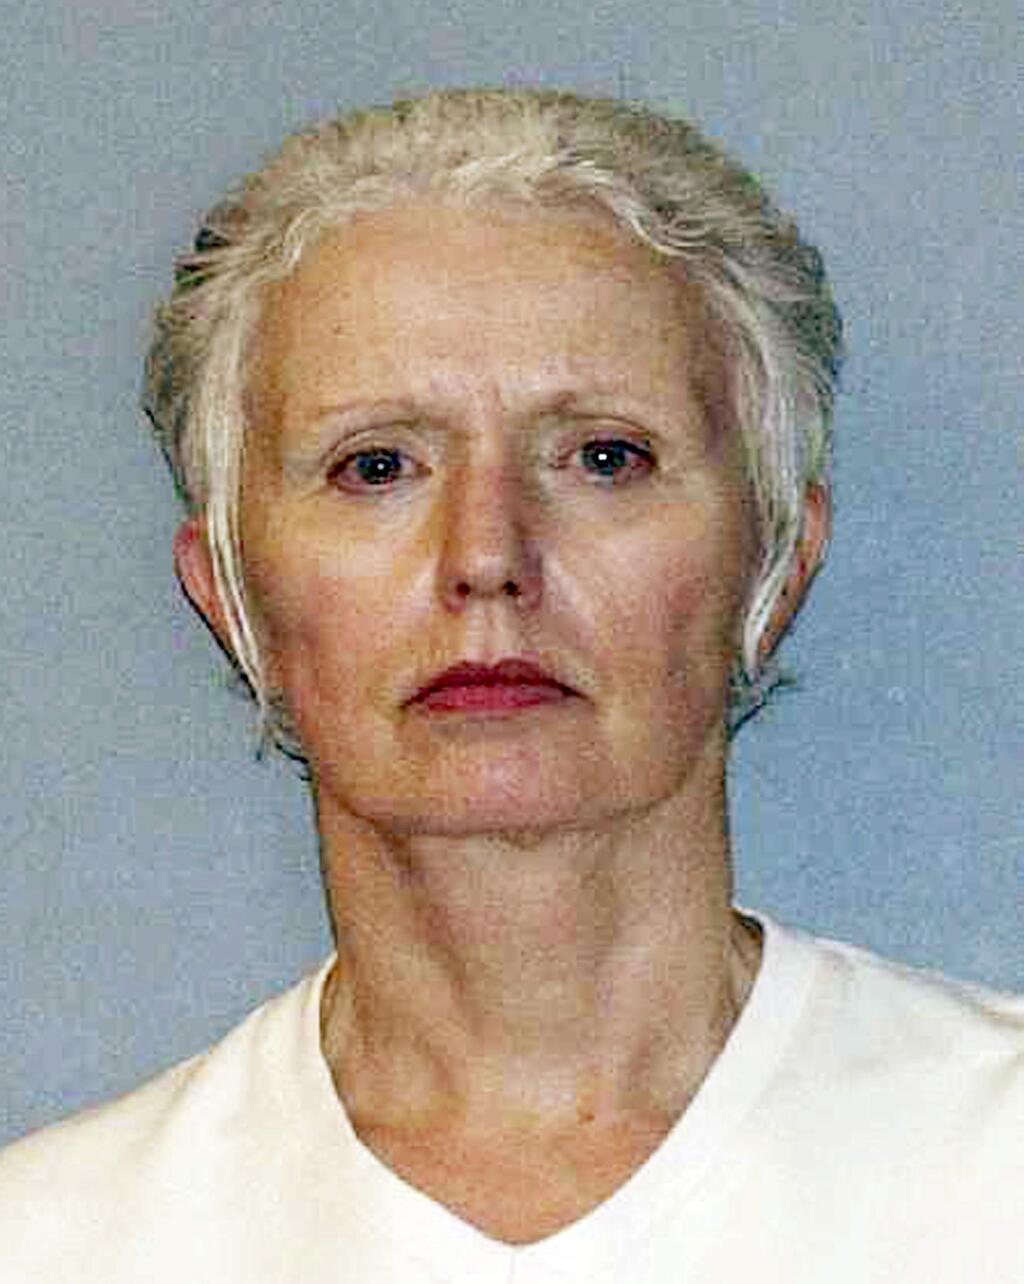 FILE - This undated file photo provided by the U.S. Marshals Service shows Catherine Greig, the longtime girlfriend of Whitey Bulger, who was captured with Bulger, June 22, 2011, in Santa Monica, Calif. Prosecutors will ask a federal judge to sentence the longtime girlfriend of Boston gangster James 'Whitey' Bulger to three more years in prison for refusing to testify about whether anyone else helped Bulger after he fled the city. Greig is scheduled to be sentenced Thursday, April 28, 2016, after pleading guilty to a criminal contempt charge for refusing to testify before a grand jury. (AP Photo/U.S. Marshals Service, File)